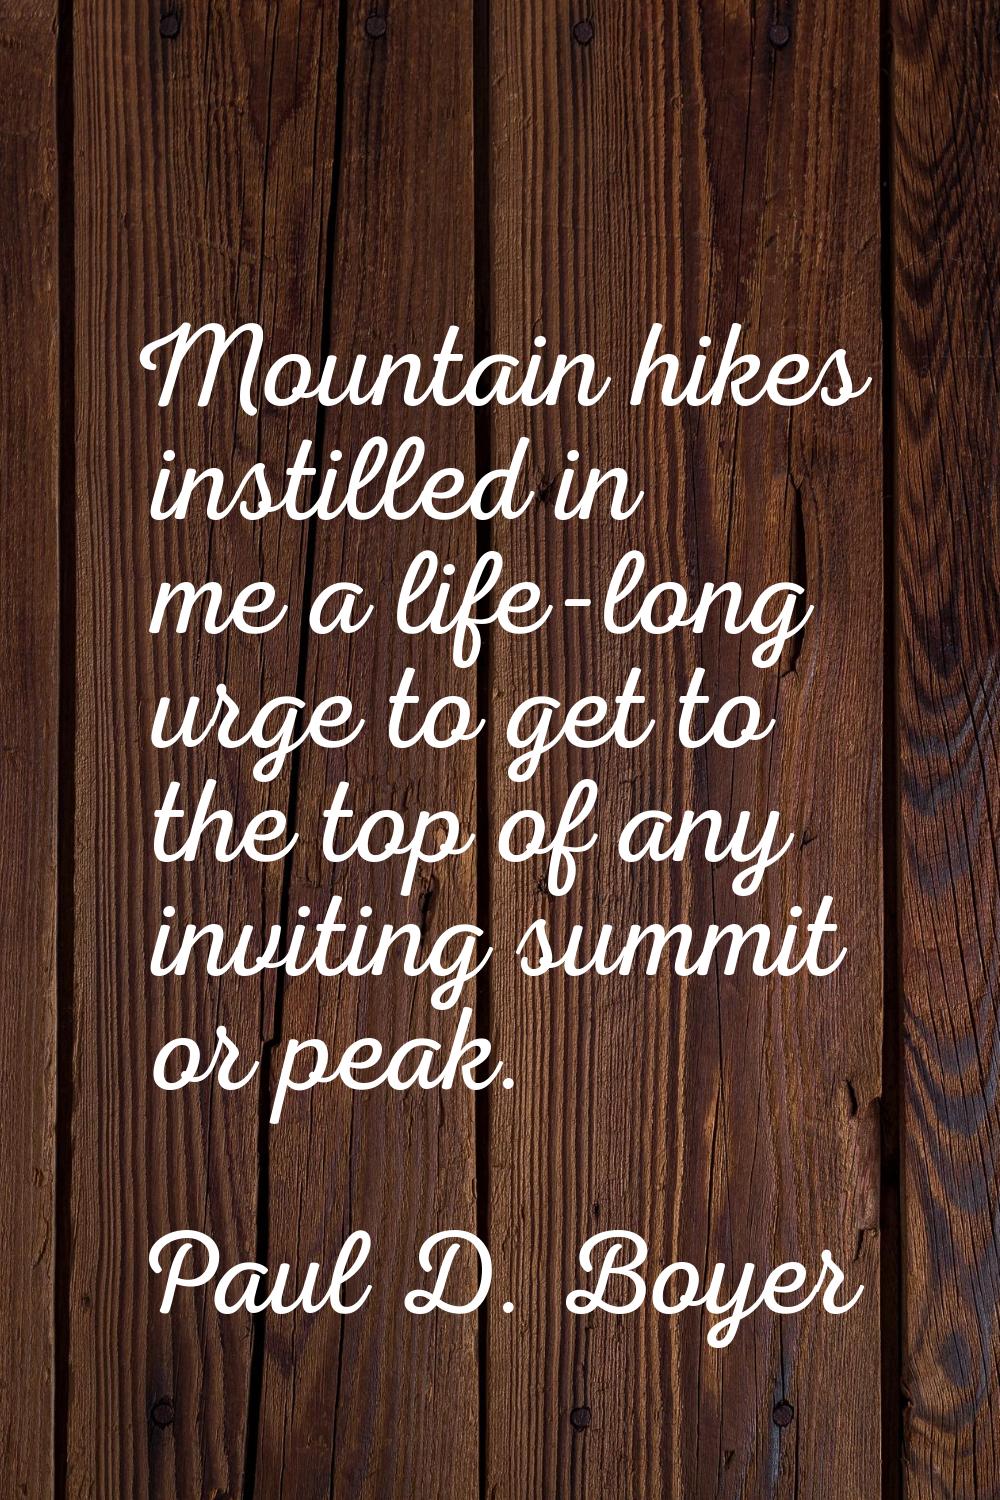 Mountain hikes instilled in me a life-long urge to get to the top of any inviting summit or peak.